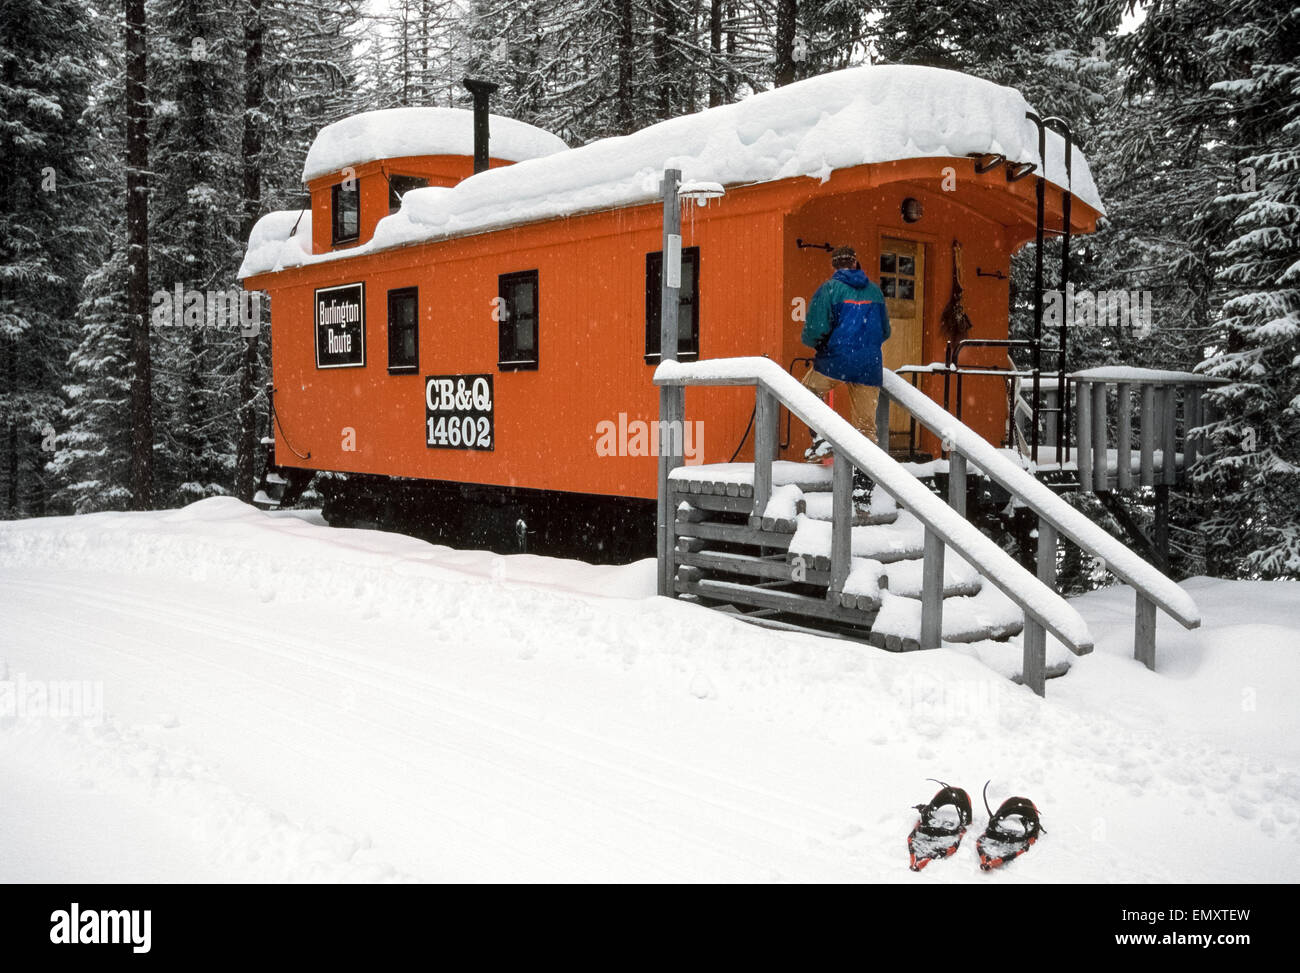 A snowshoeing guest enters his lodging that is a restored 1895 railroad caboose, one of eight historic caboose railcars that are major attractions at the Izzak Walton Inn at the edge of Glacier National Park in Montana, USA. The orange-painted car from the Chicago, Burlington and Quincy line now features a full-size bed, bathroom with shower, and well-equipped kitchenette. The remote inn is open year-round and reached by rail with Amtrak, America's major passenger rail service. Stock Photo